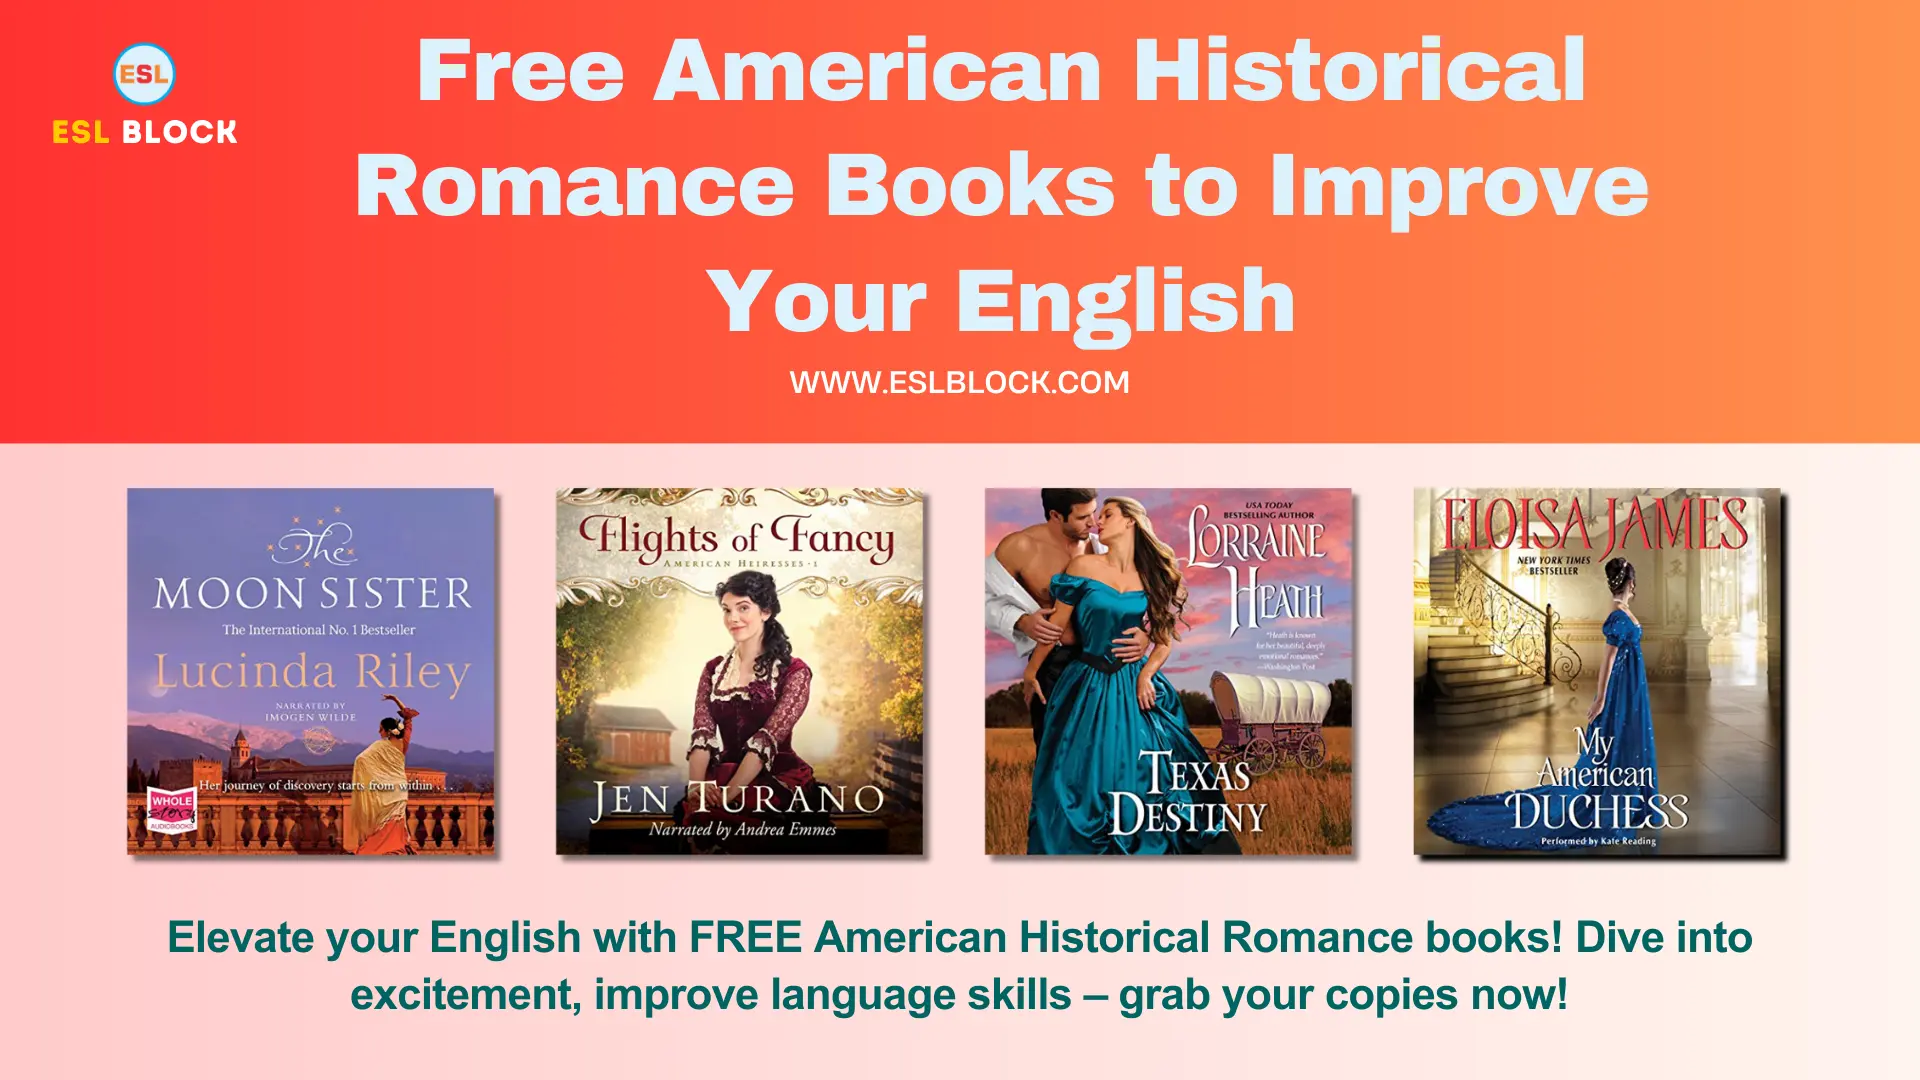 Free American Historical Romance Books to Improve Your English